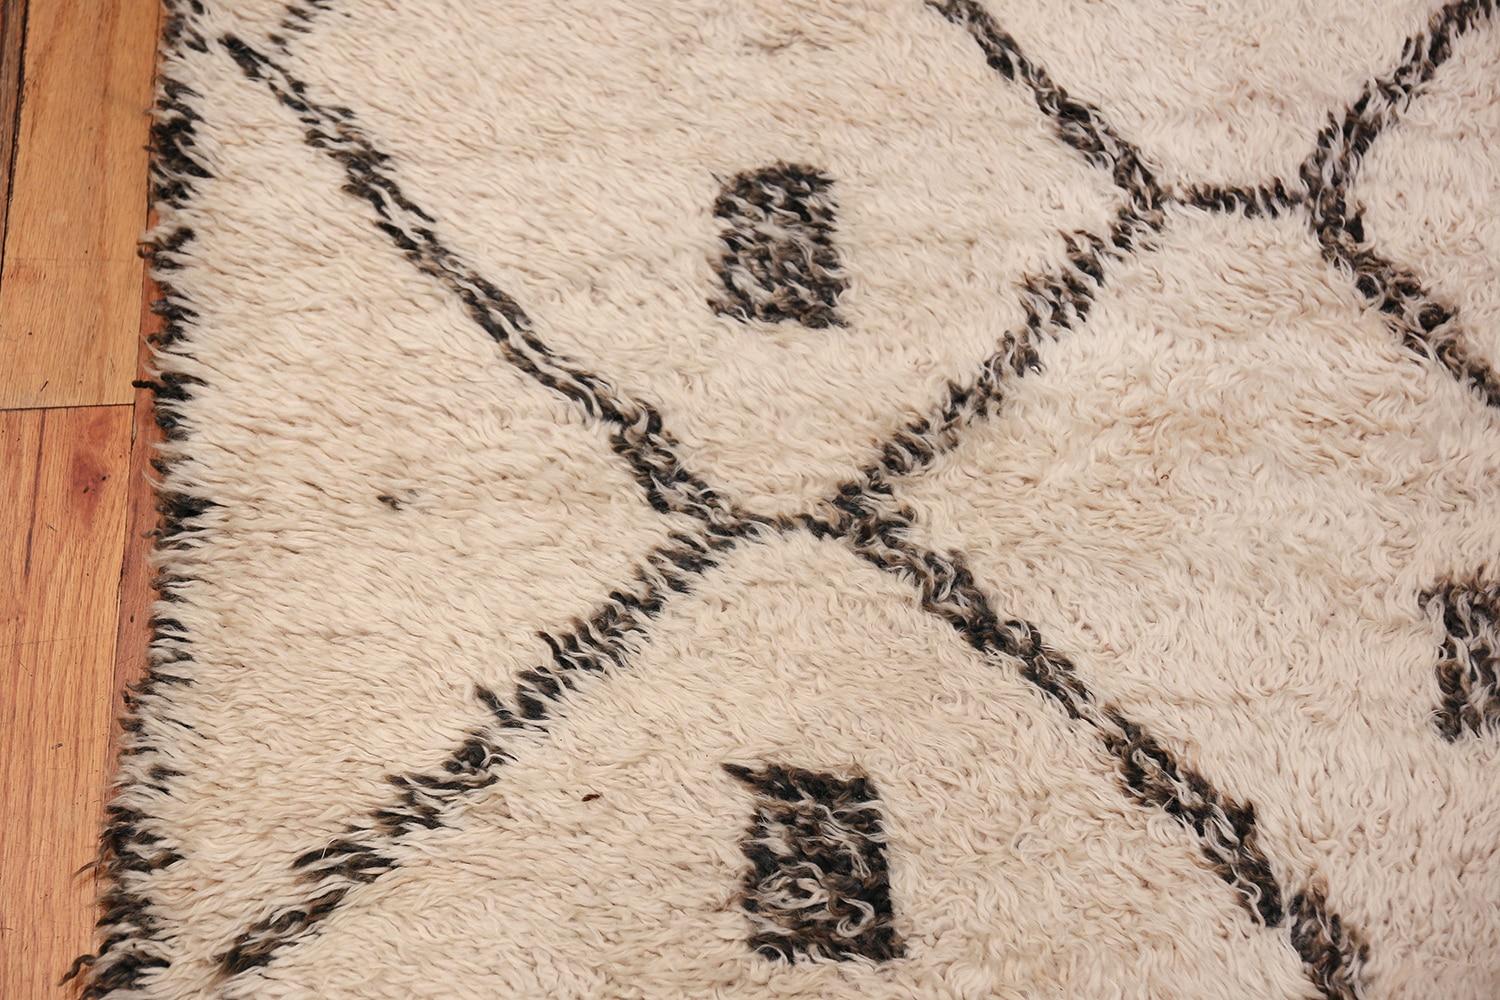 Beautiful and Primitive Ivory Shag Pile Vintage Beni Ourain Moroccan Rug, Country of Origin / Rug Type: Morocco, Circa date: Mid – 20th Century. Size: 6 ft 6 in x 12 ft 3 in (1.98 m x 3.73 m).